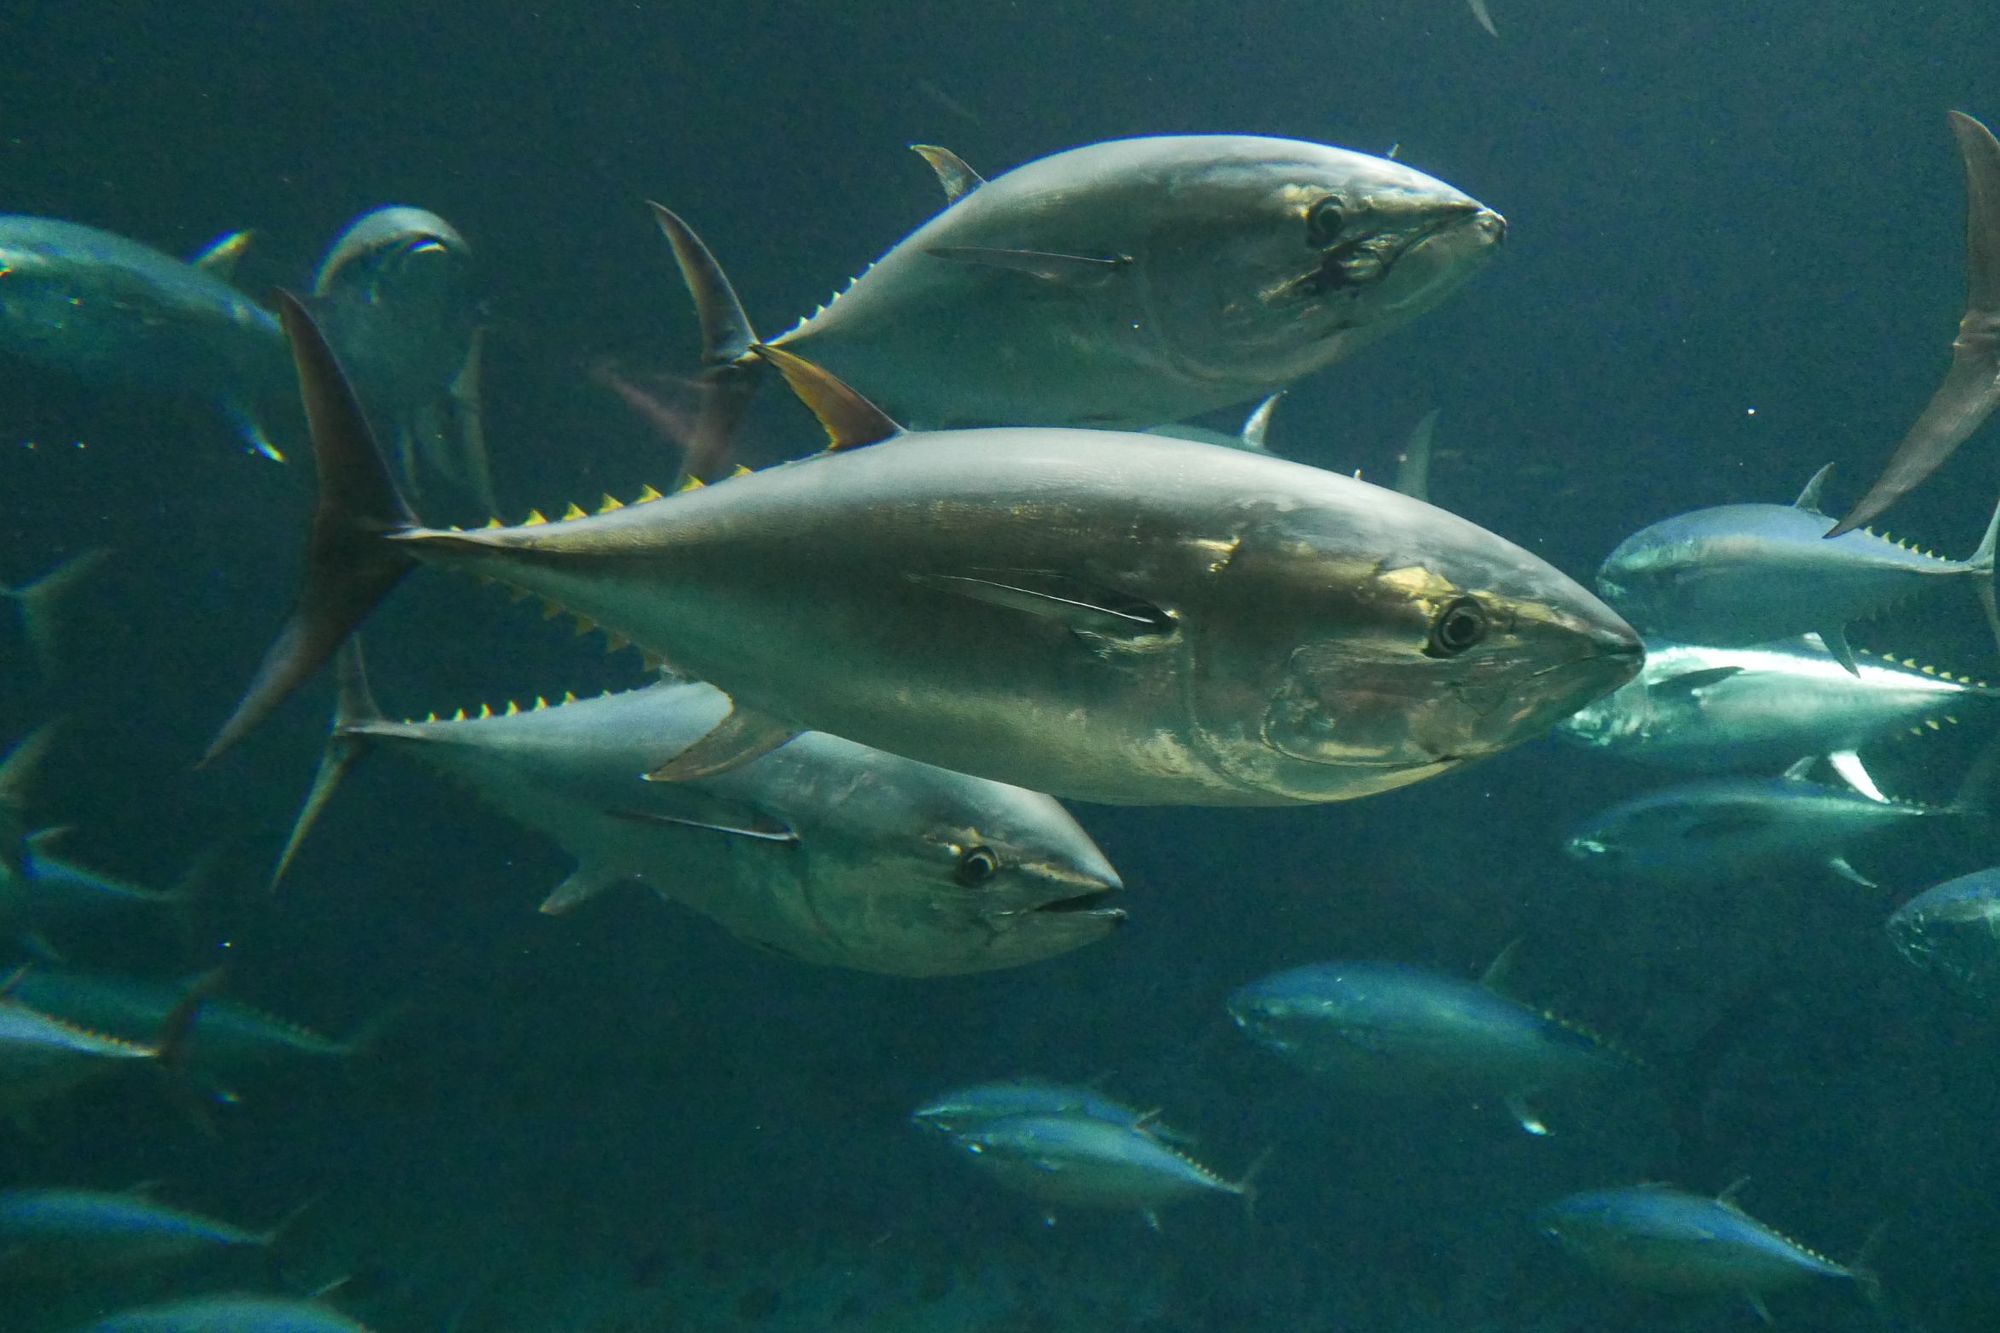 Atlantic bluefin tuna have moved from the endangered species lit to the list of least concern. Photo: Getty